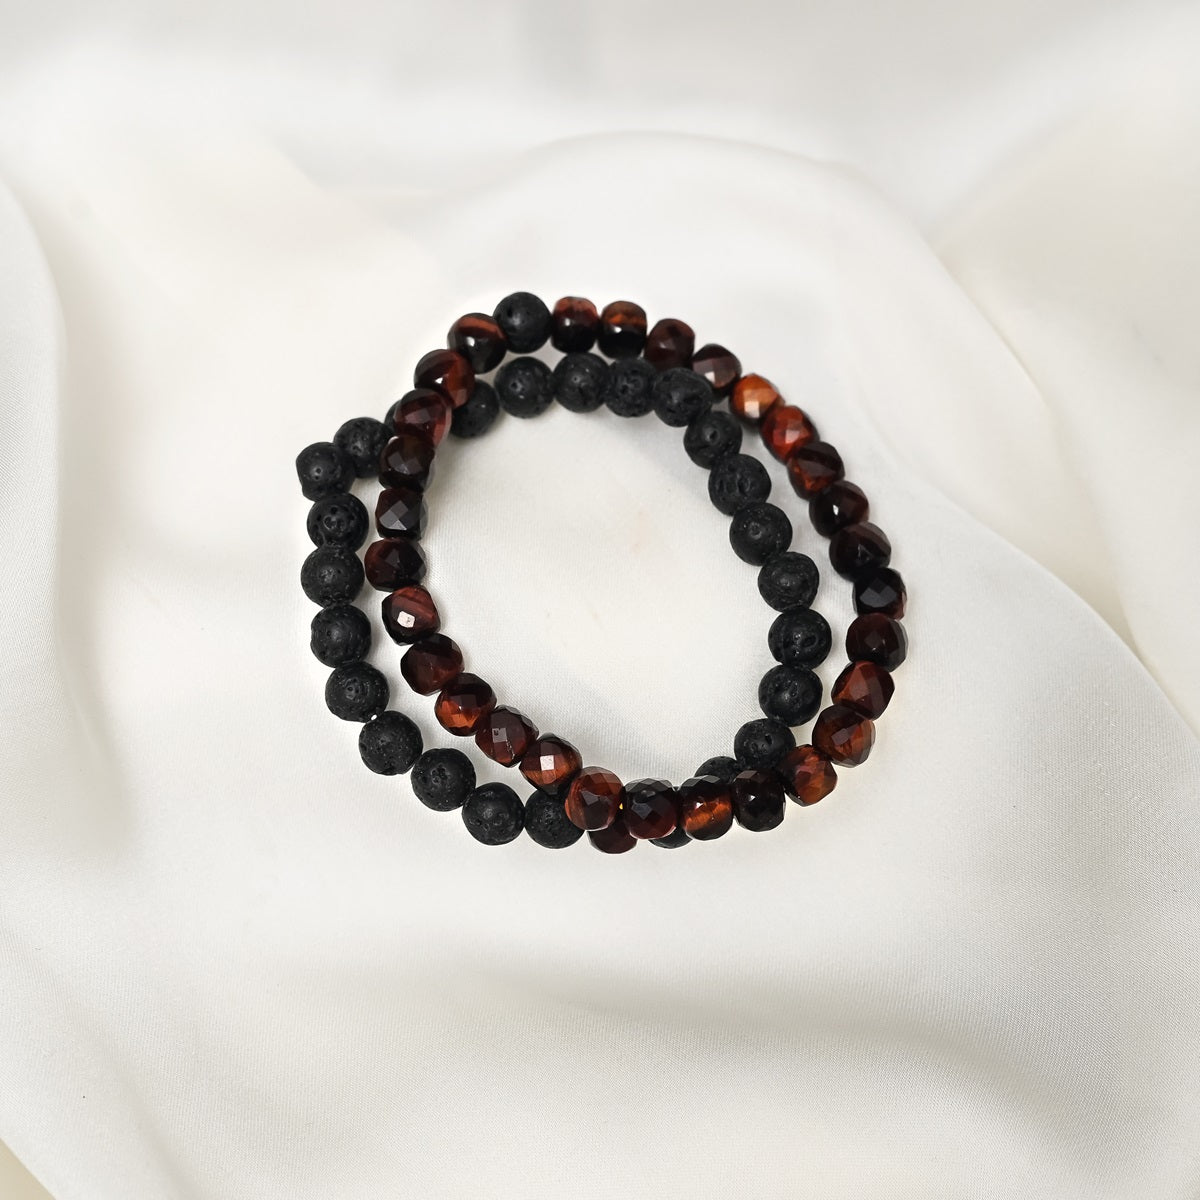 Artistic close-up of the Red Tiger's Eye & Lava Gemstone Bracelet. A captivating shot capturing the fiery red hues of Tiger's Eye and the raw elegance of lava gemstones, creating a unique and eye-catching composition.